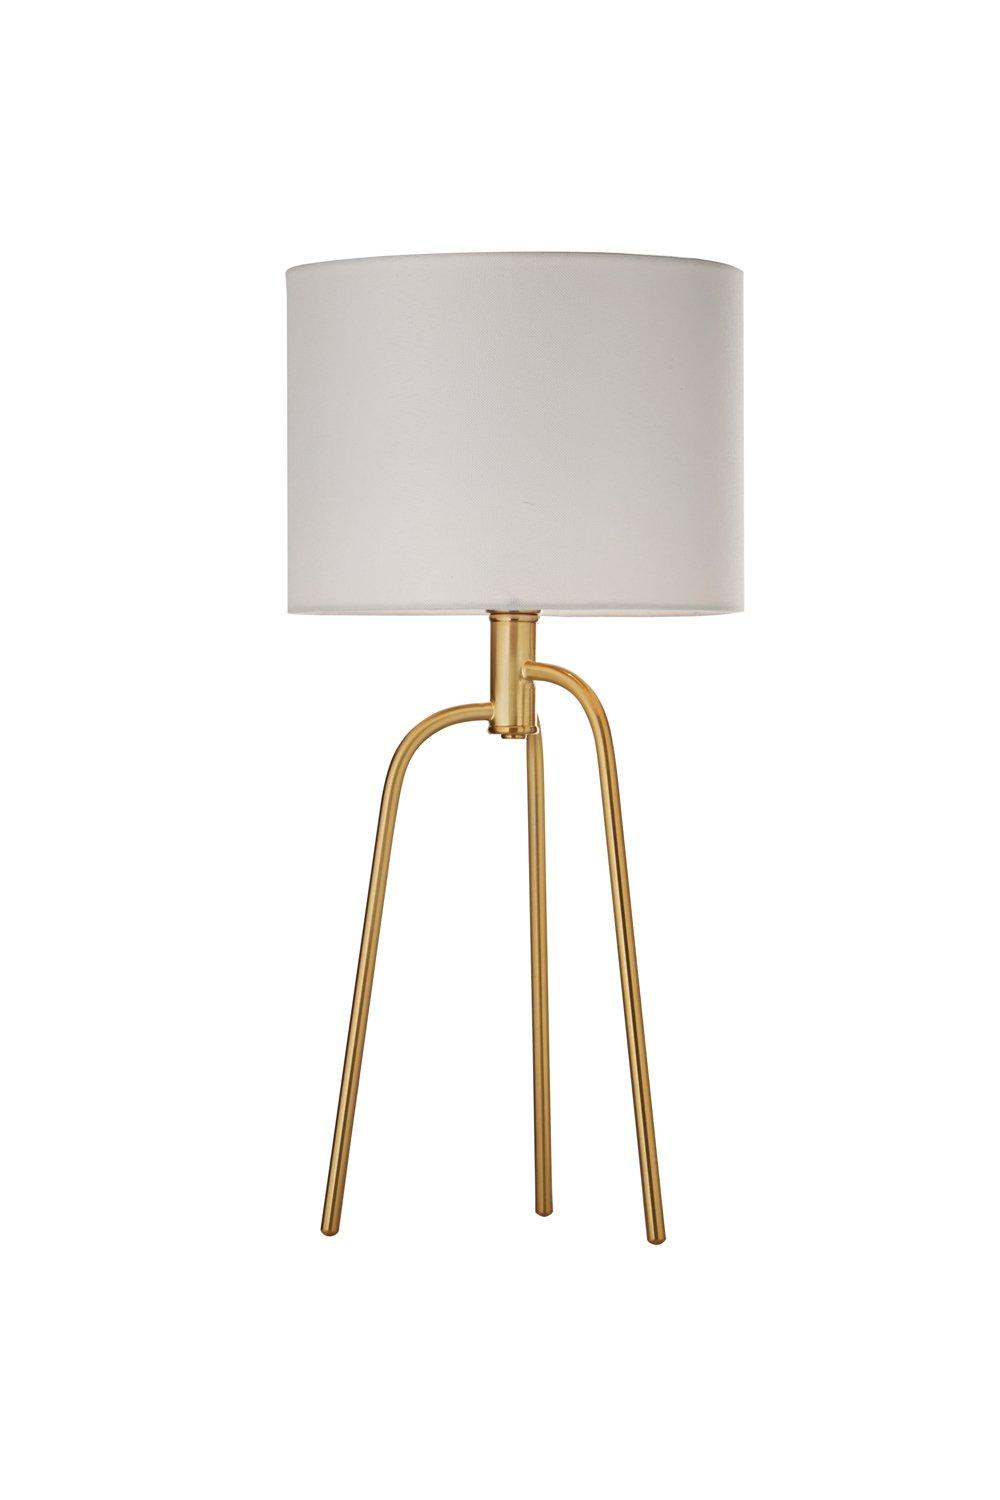 'Jerry' Table Lamp Gold